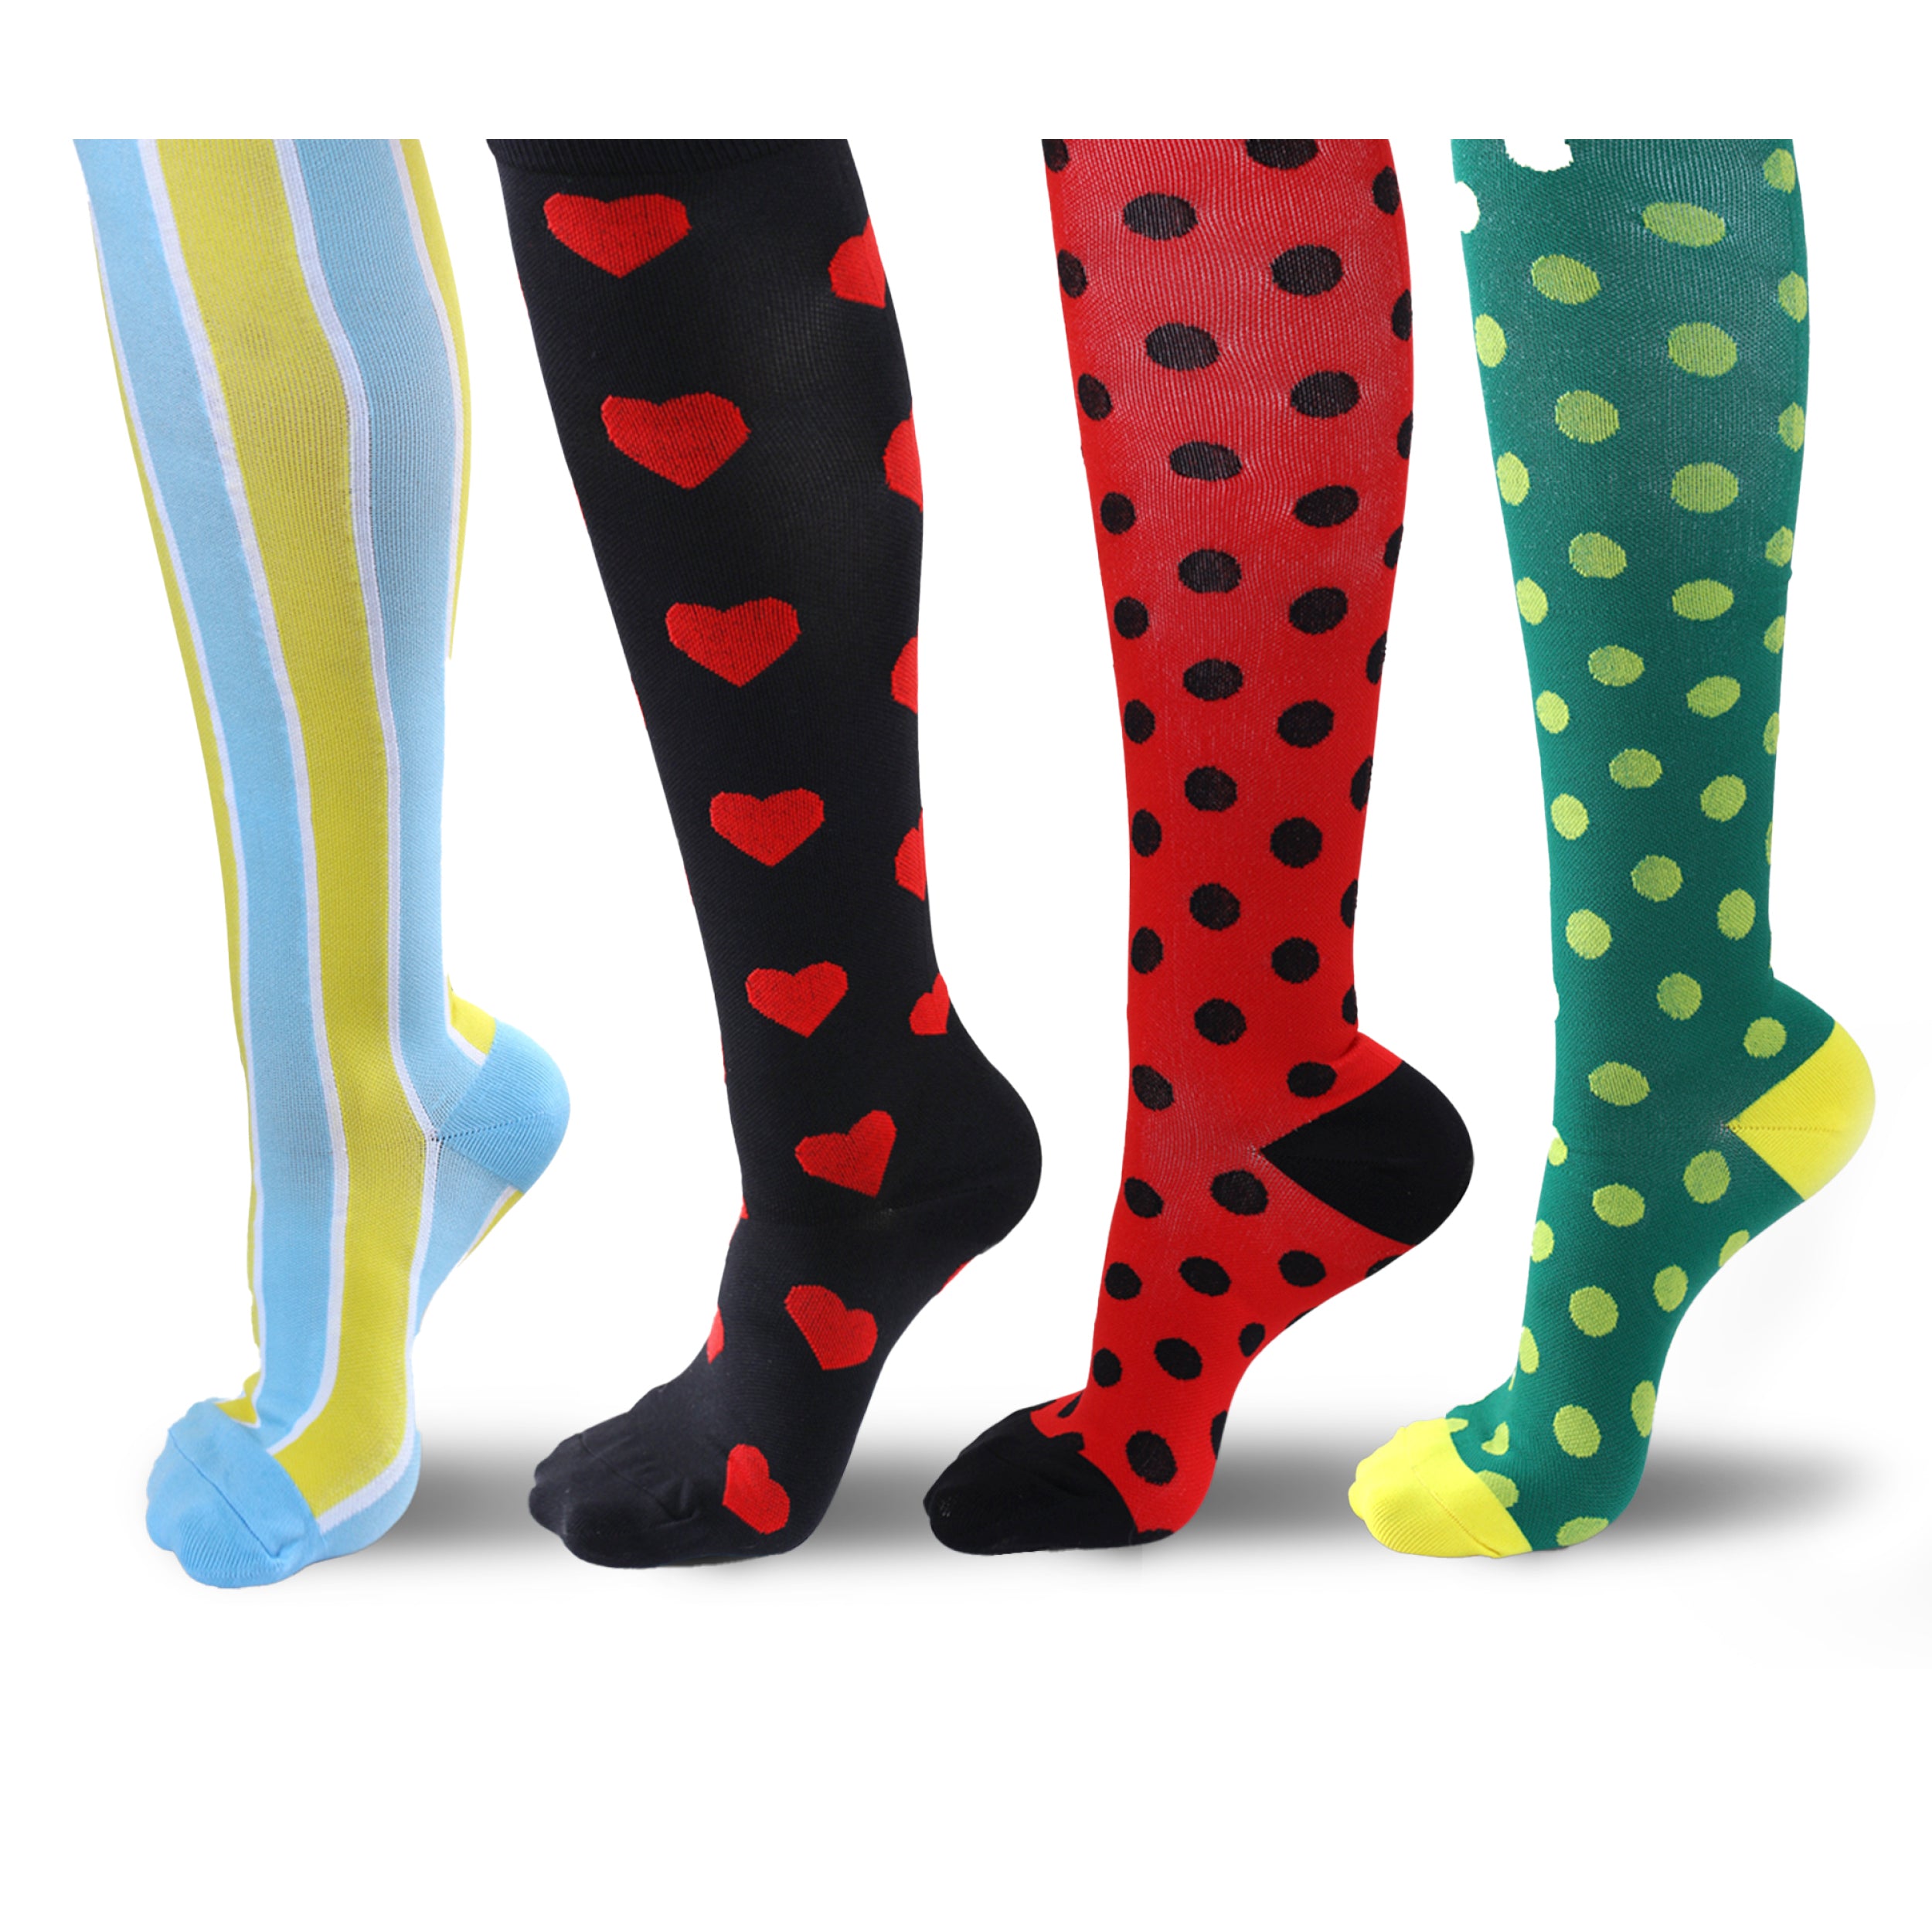 Four different colors and designs of compression socks